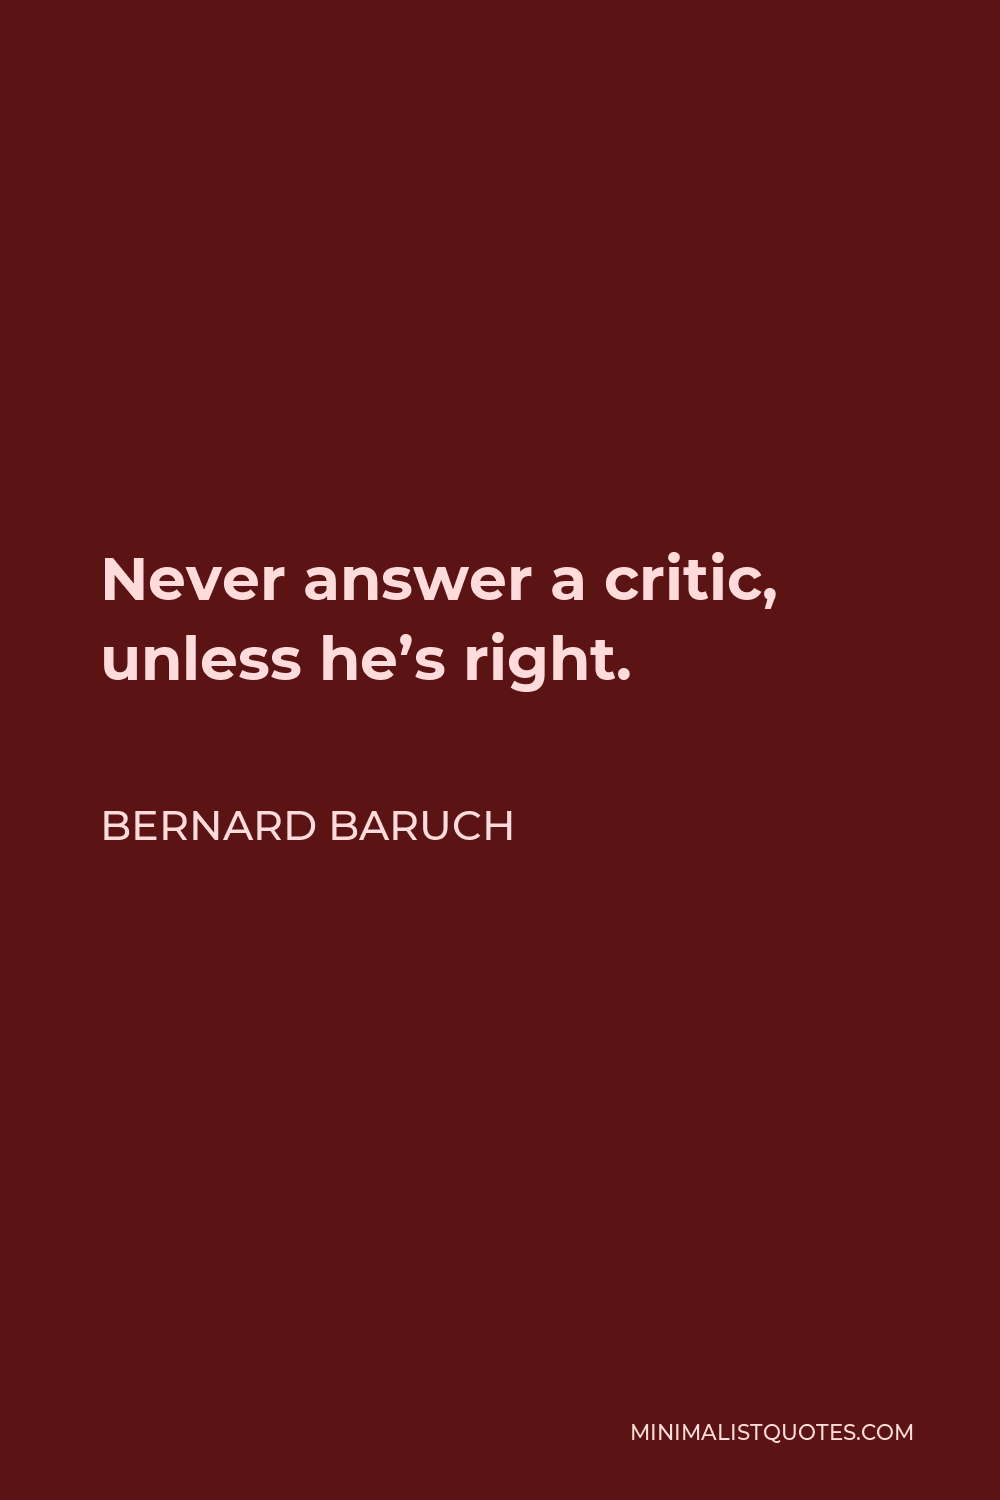 Bernard Baruch Quote - Never answer a critic, unless he’s right.